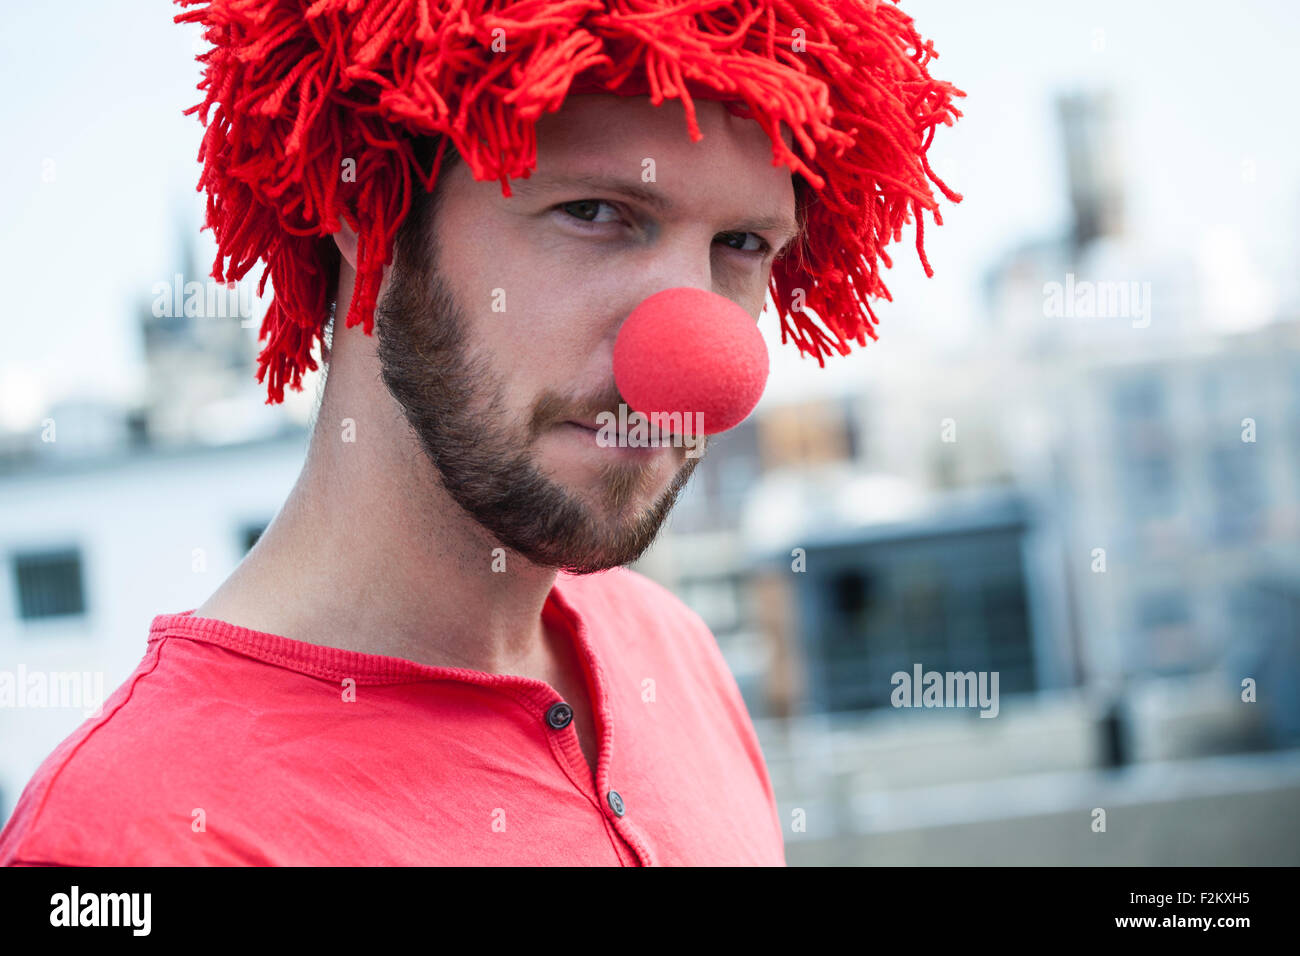 Germany, Cologne, portrait of bearded young man wearing clown's nose and red wig Stock Photo